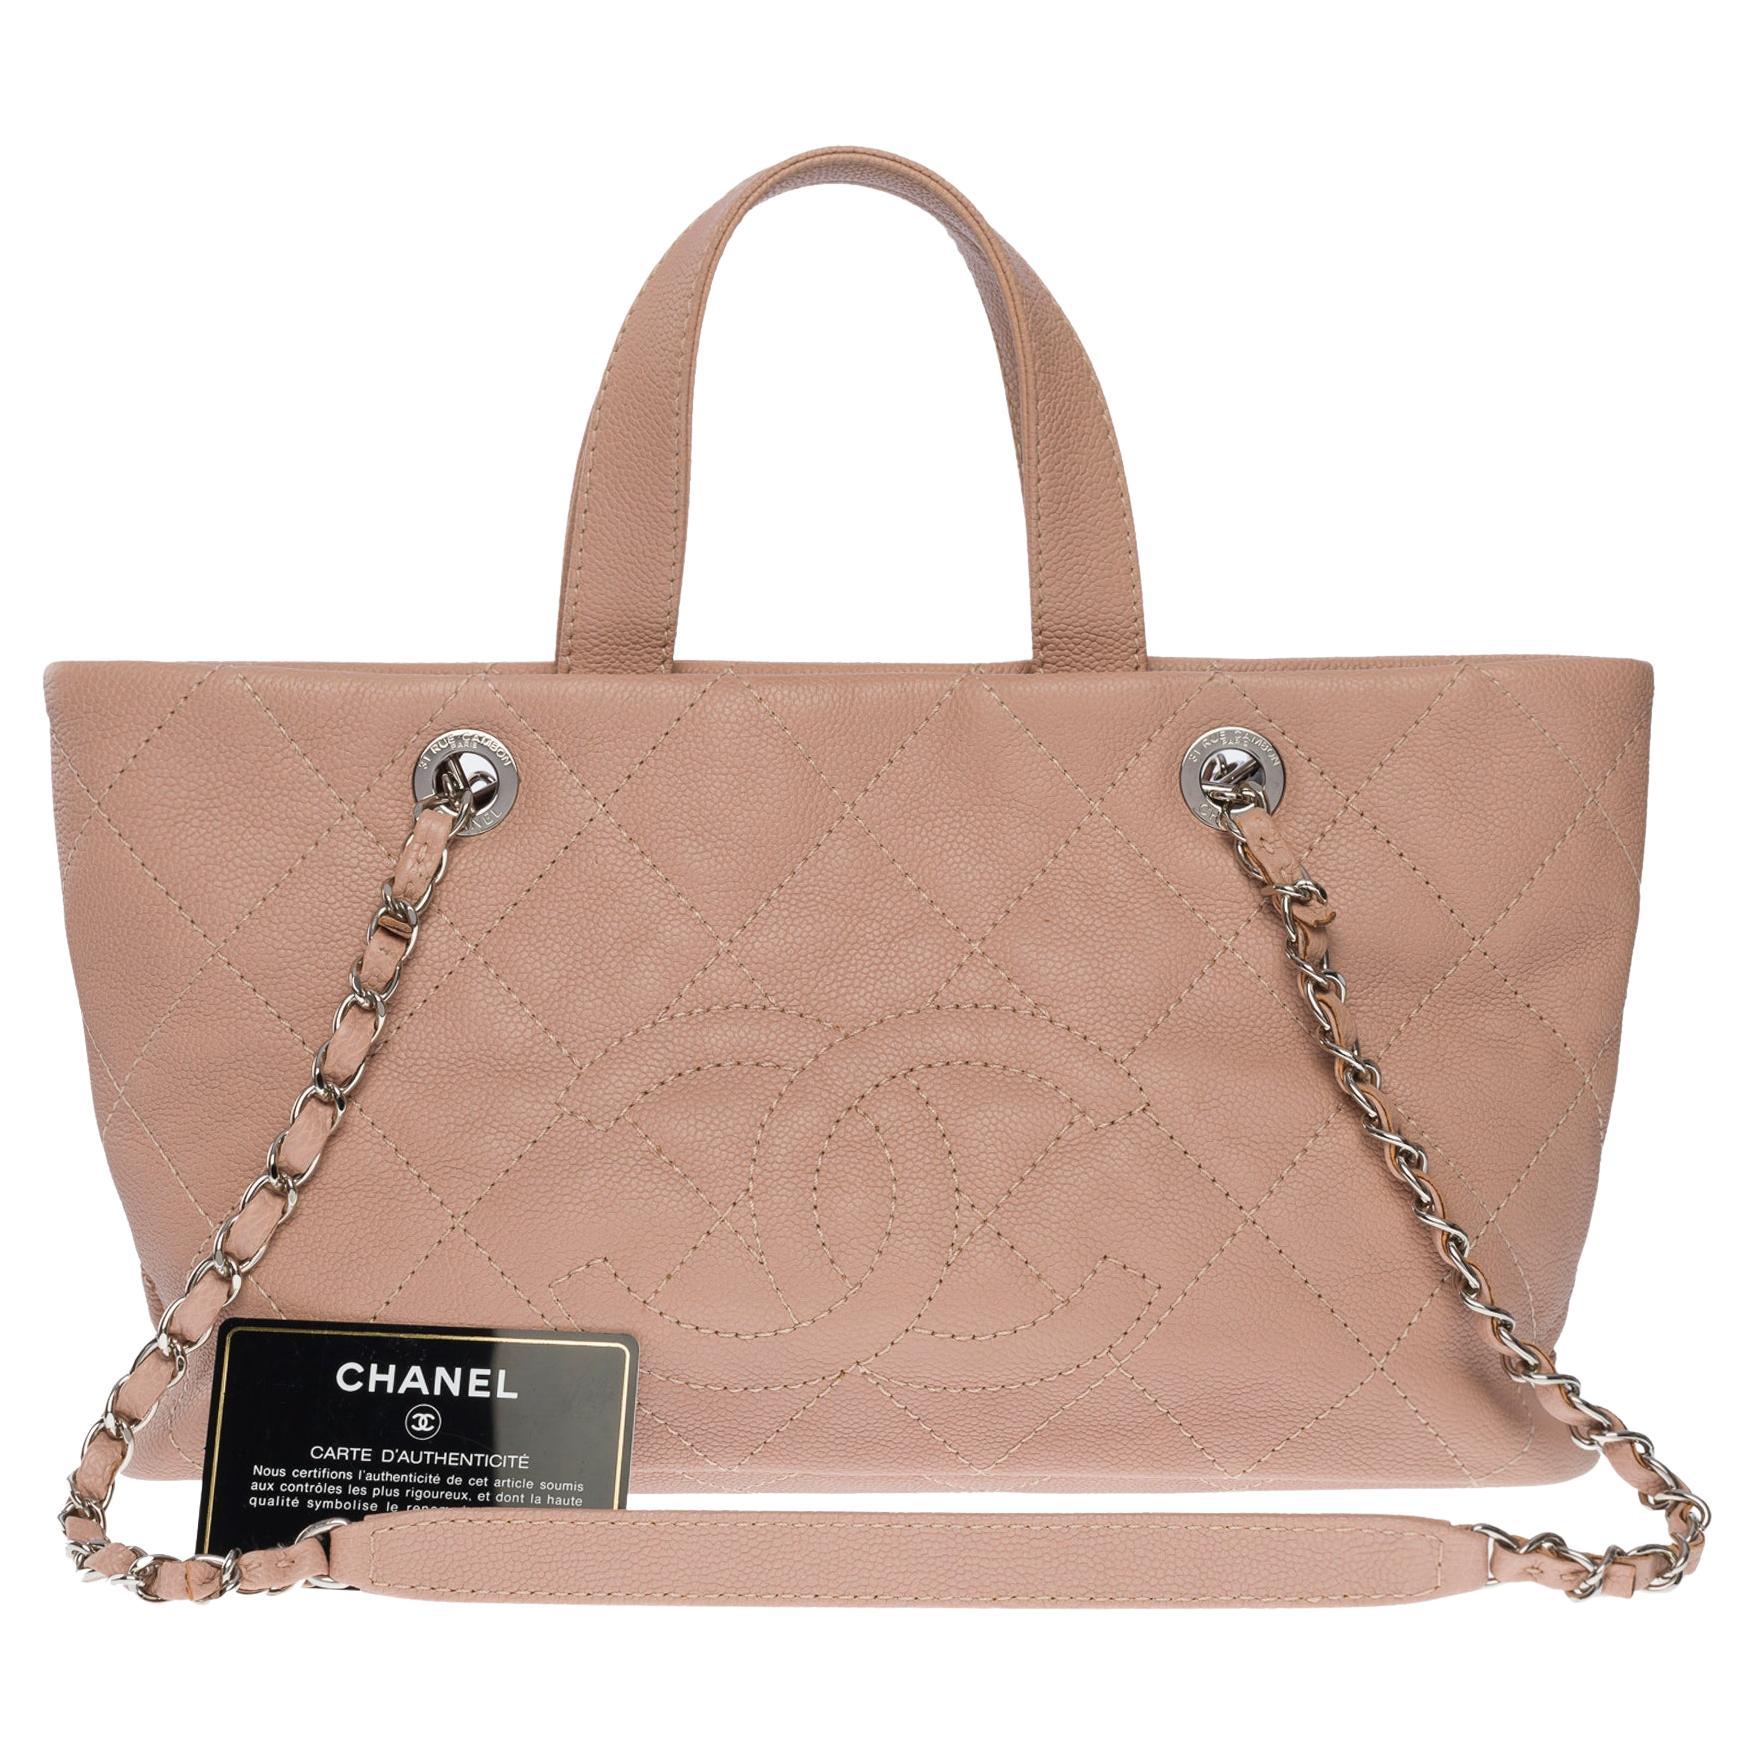 Amazing Chanel Mini shopping Tote bag in Pink Caviar quilted leather, SHW